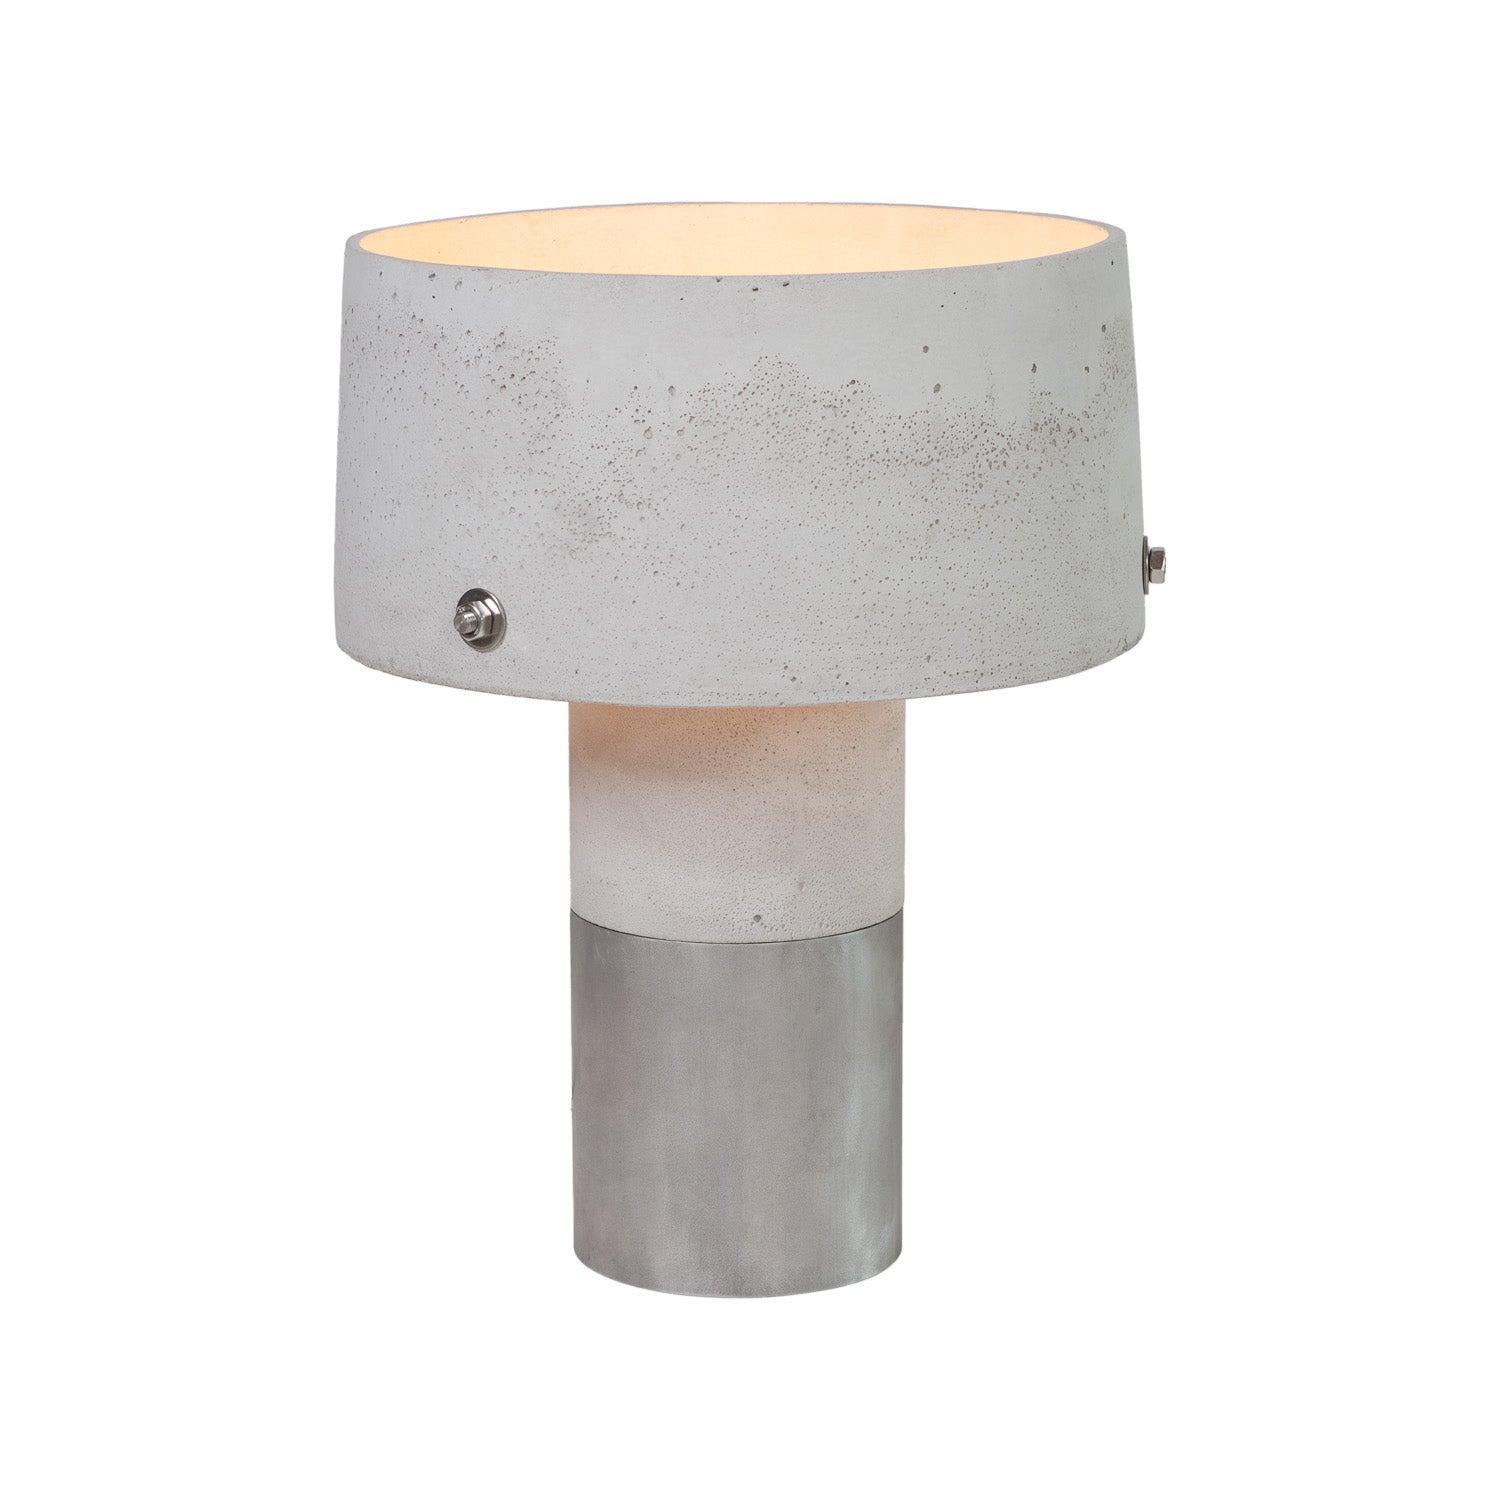 Talma is an industrial table lamp that will perfectly complement every loft interior. Made of concrete and metal finishing elements, causes each copy to be slightly different in color and texture. The material used to produce this reflector, absorbs the rays of light, giving a pleasant, muffled glow.